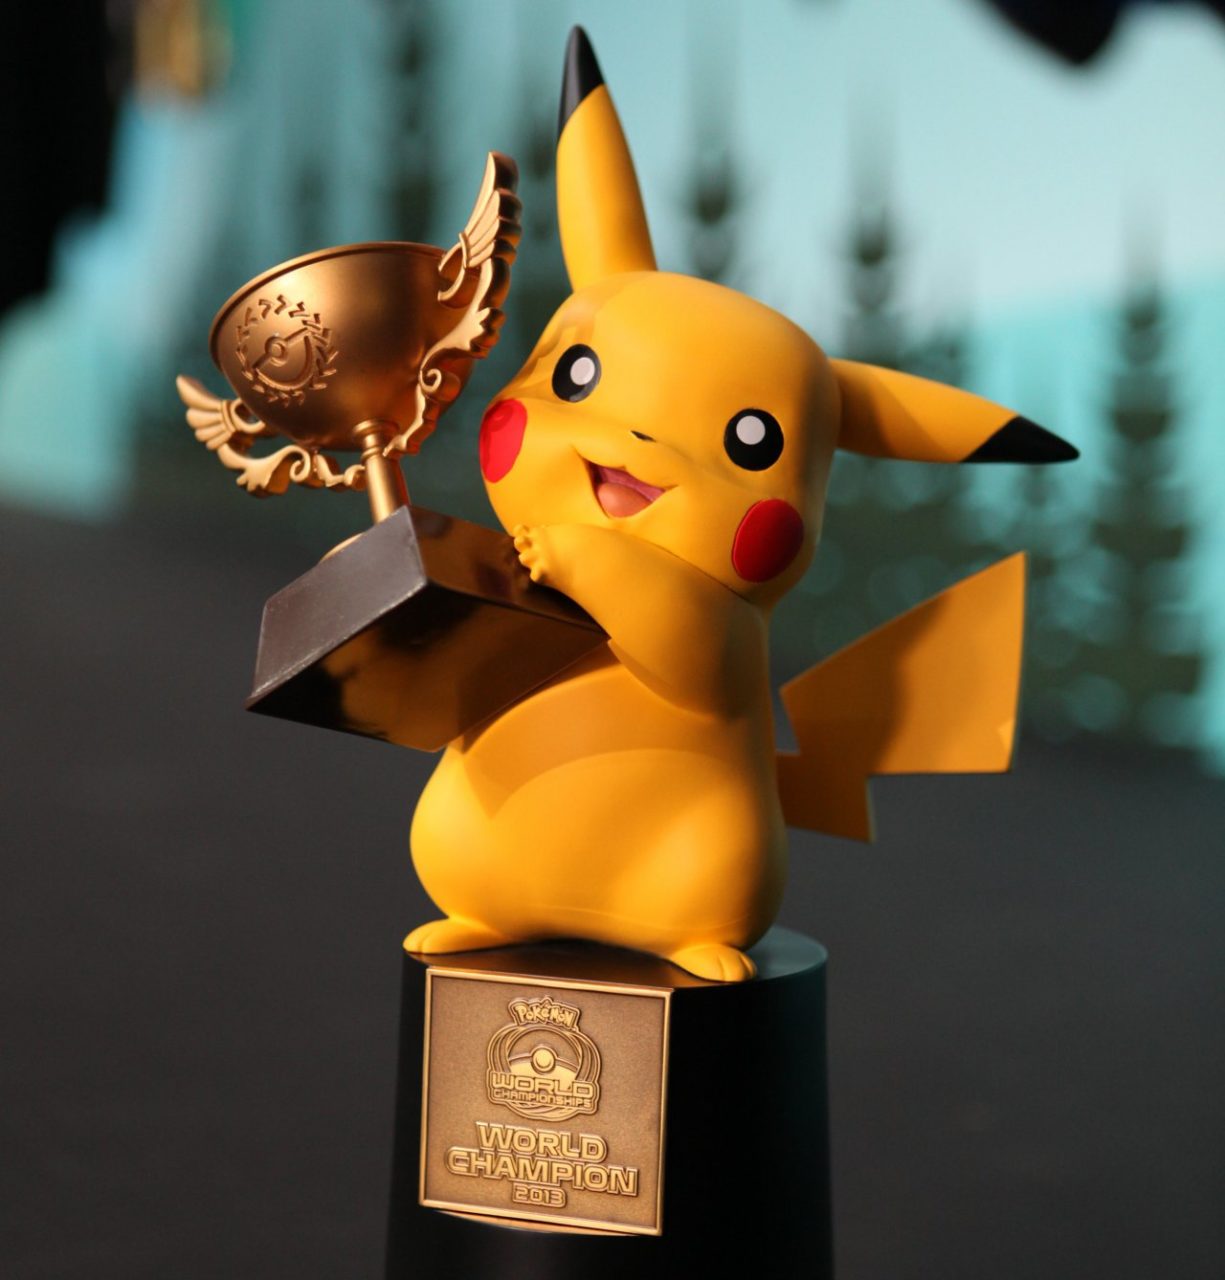 Pokémon World Championships Live Streaming Details for August